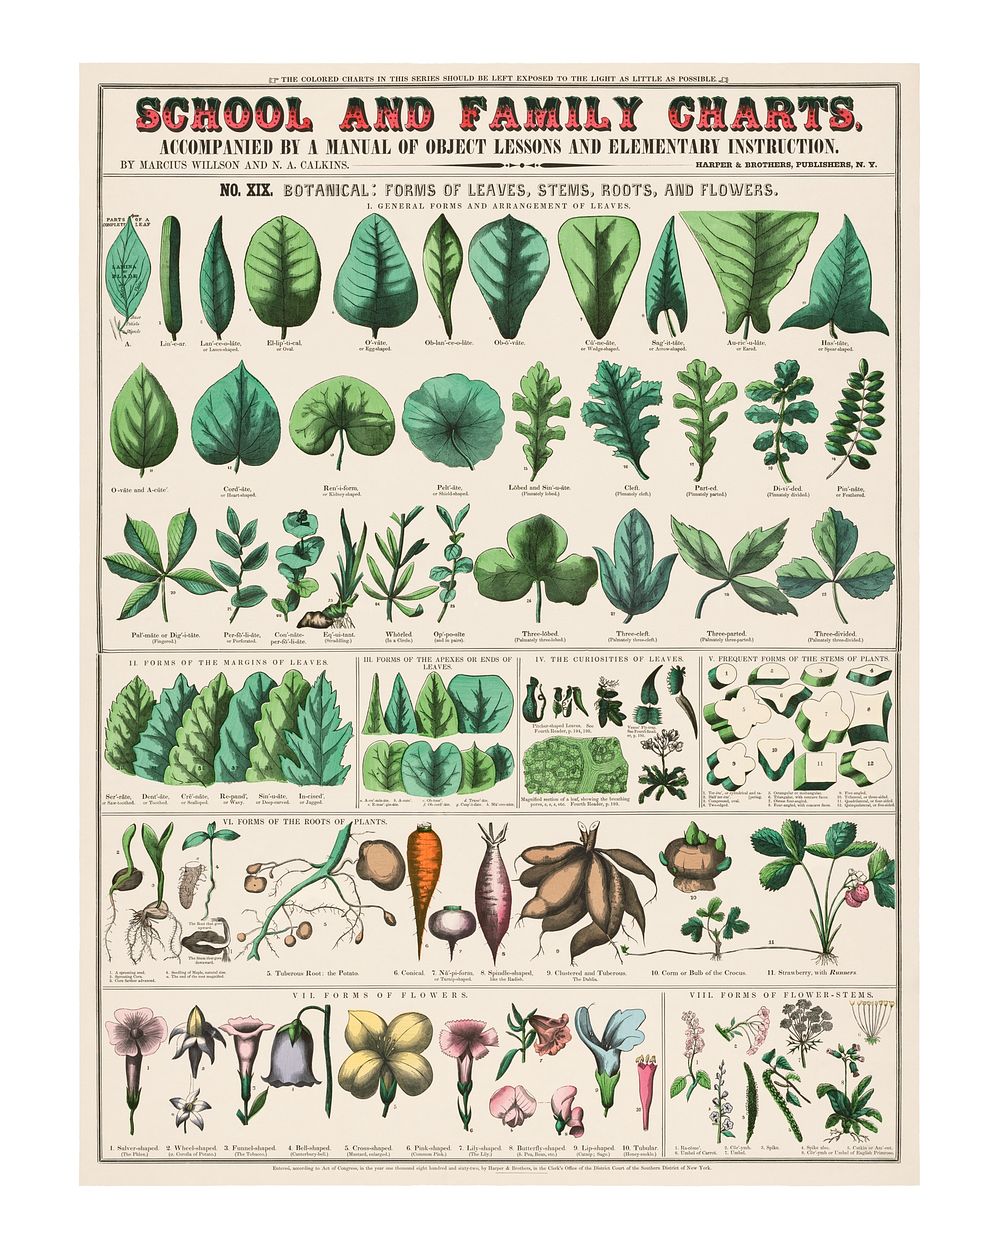 Vintage botanical art print. School & family charts poster (1890) by Marcius Willson and Norman A. Calkins. Original from…